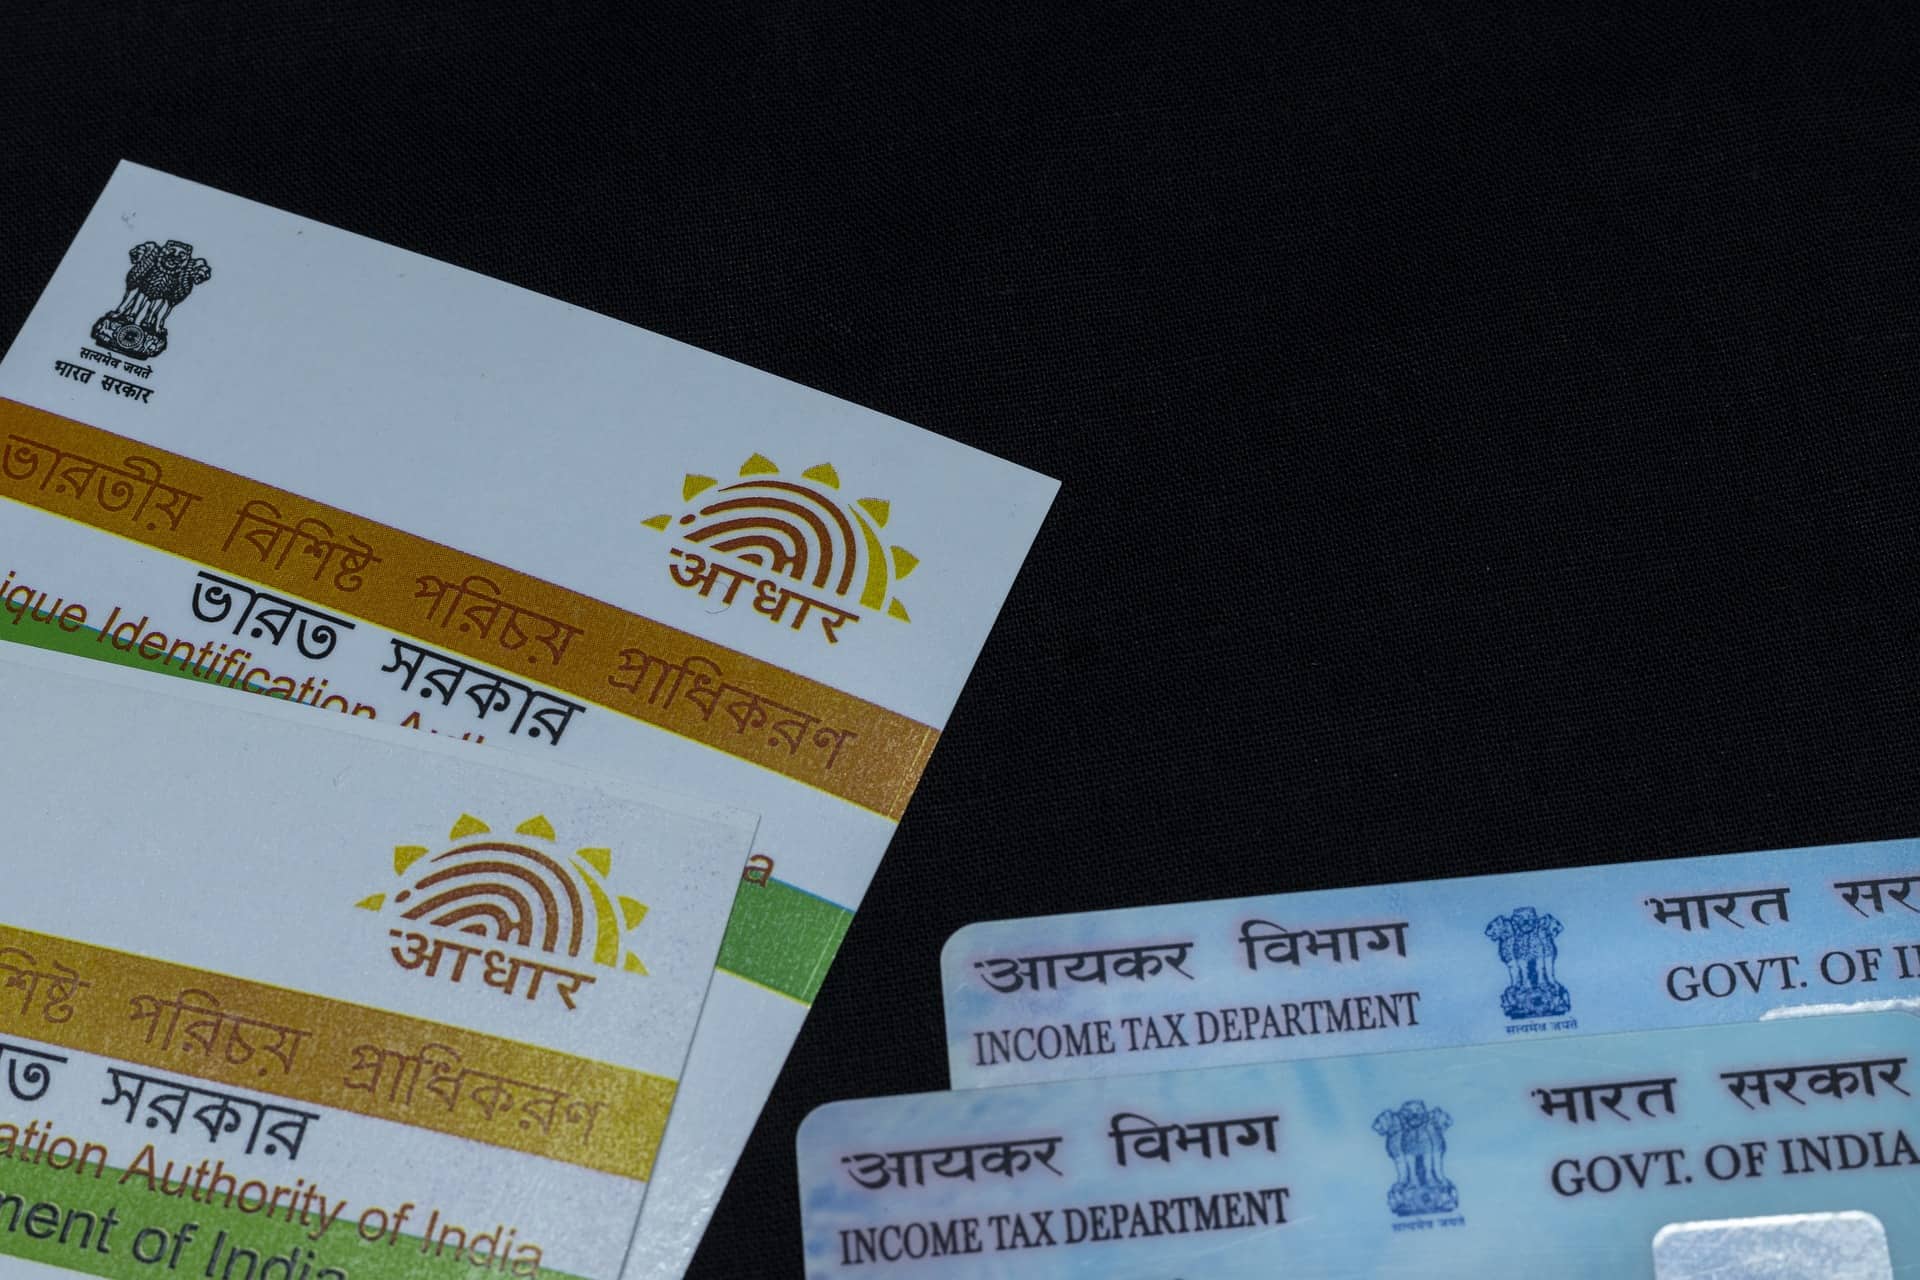 How to change date of birth on Aadhaar Card and documents required: A step-by-step guide